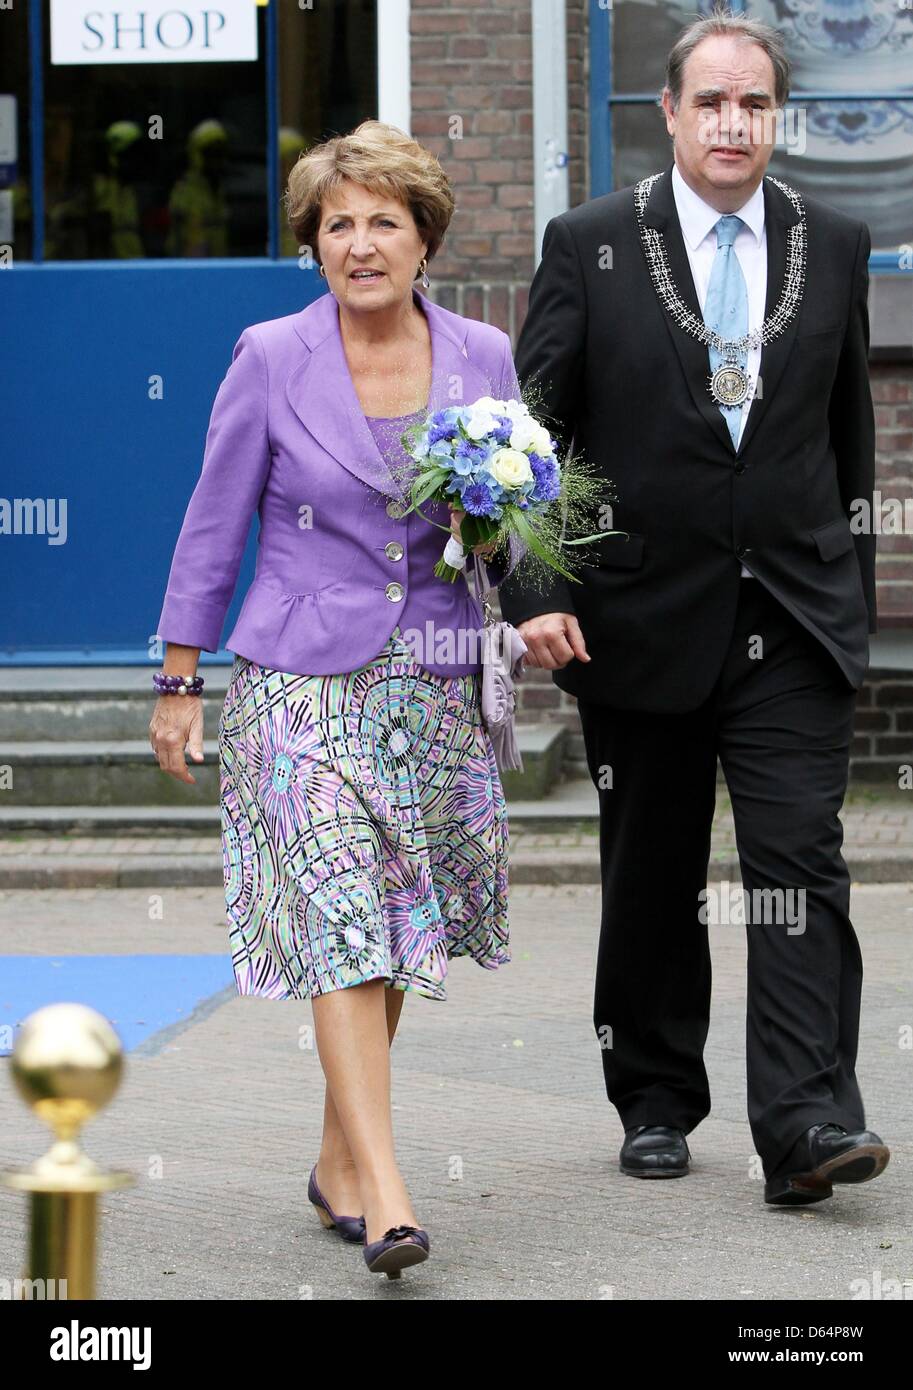 Princess Margriet of The Netherlands arrives to open the Royal Delft Experience multimedia show in the 'Porceleyne Fles' - the Roayl Porcelain factory in Delft, The Netherlands, 31 May 2012. Photo: Patrick van Katwijk ** NETERLANDS OUT ** Stock Photo